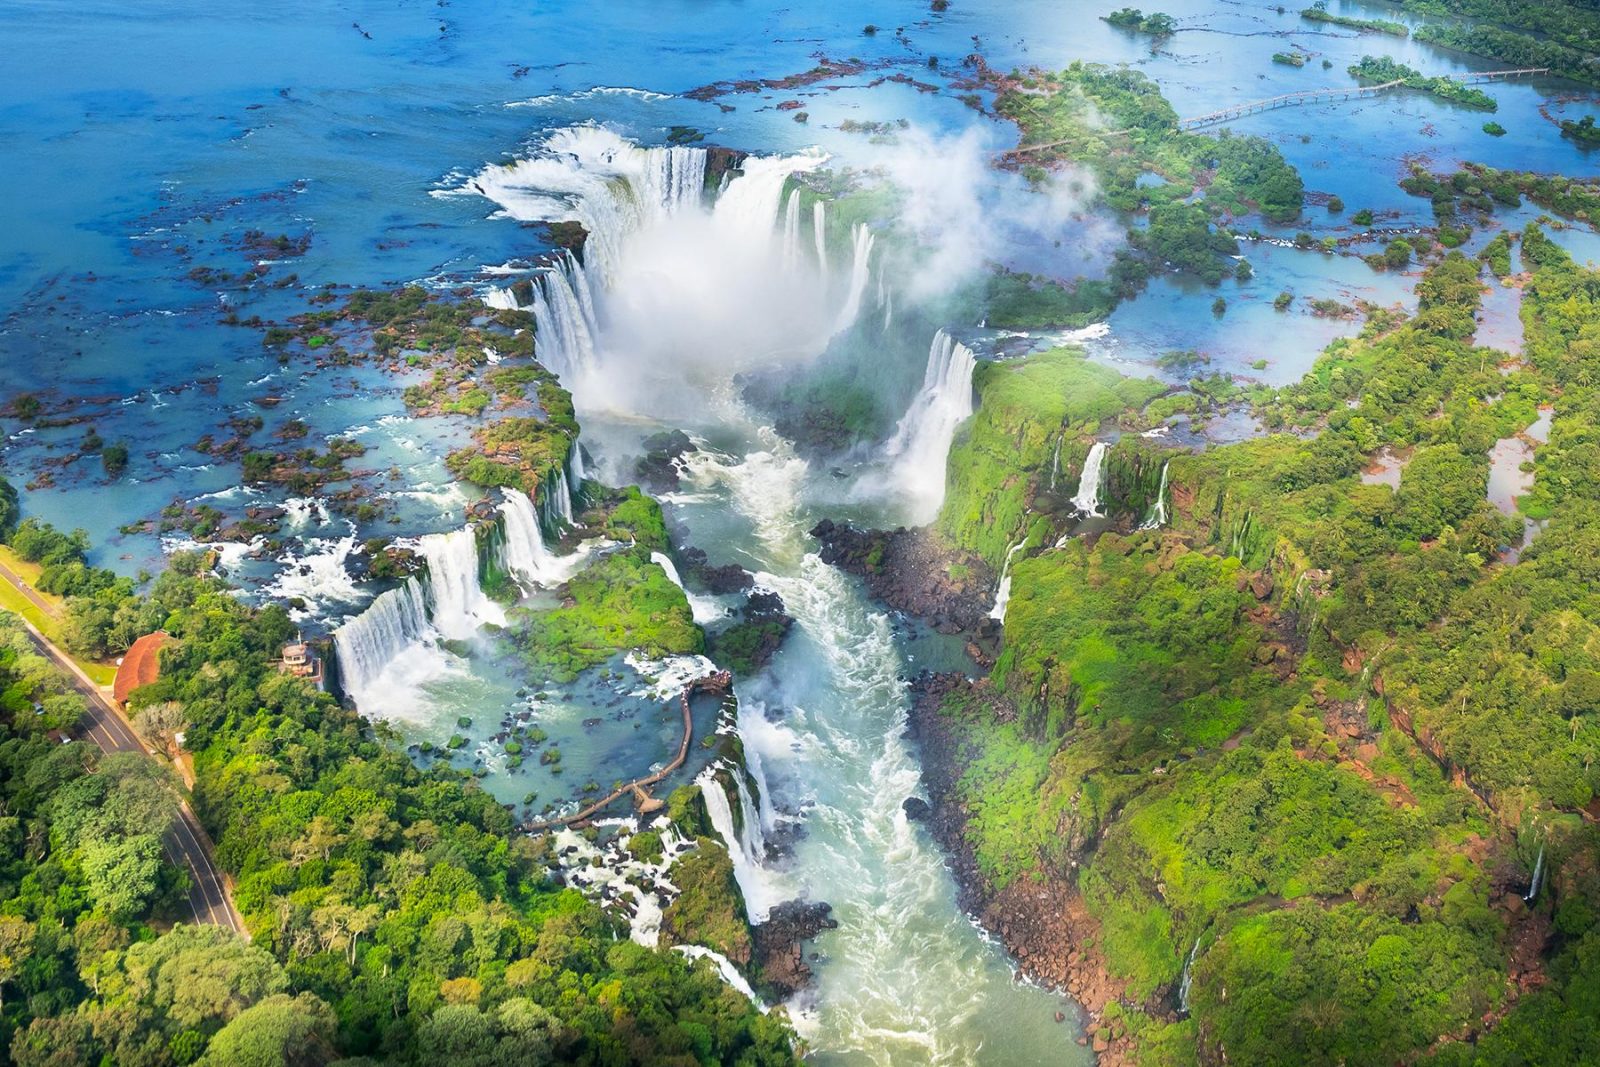 🚢 Journey Around the World in 24 Questions – How Well Can You Score? Iguazu Falls